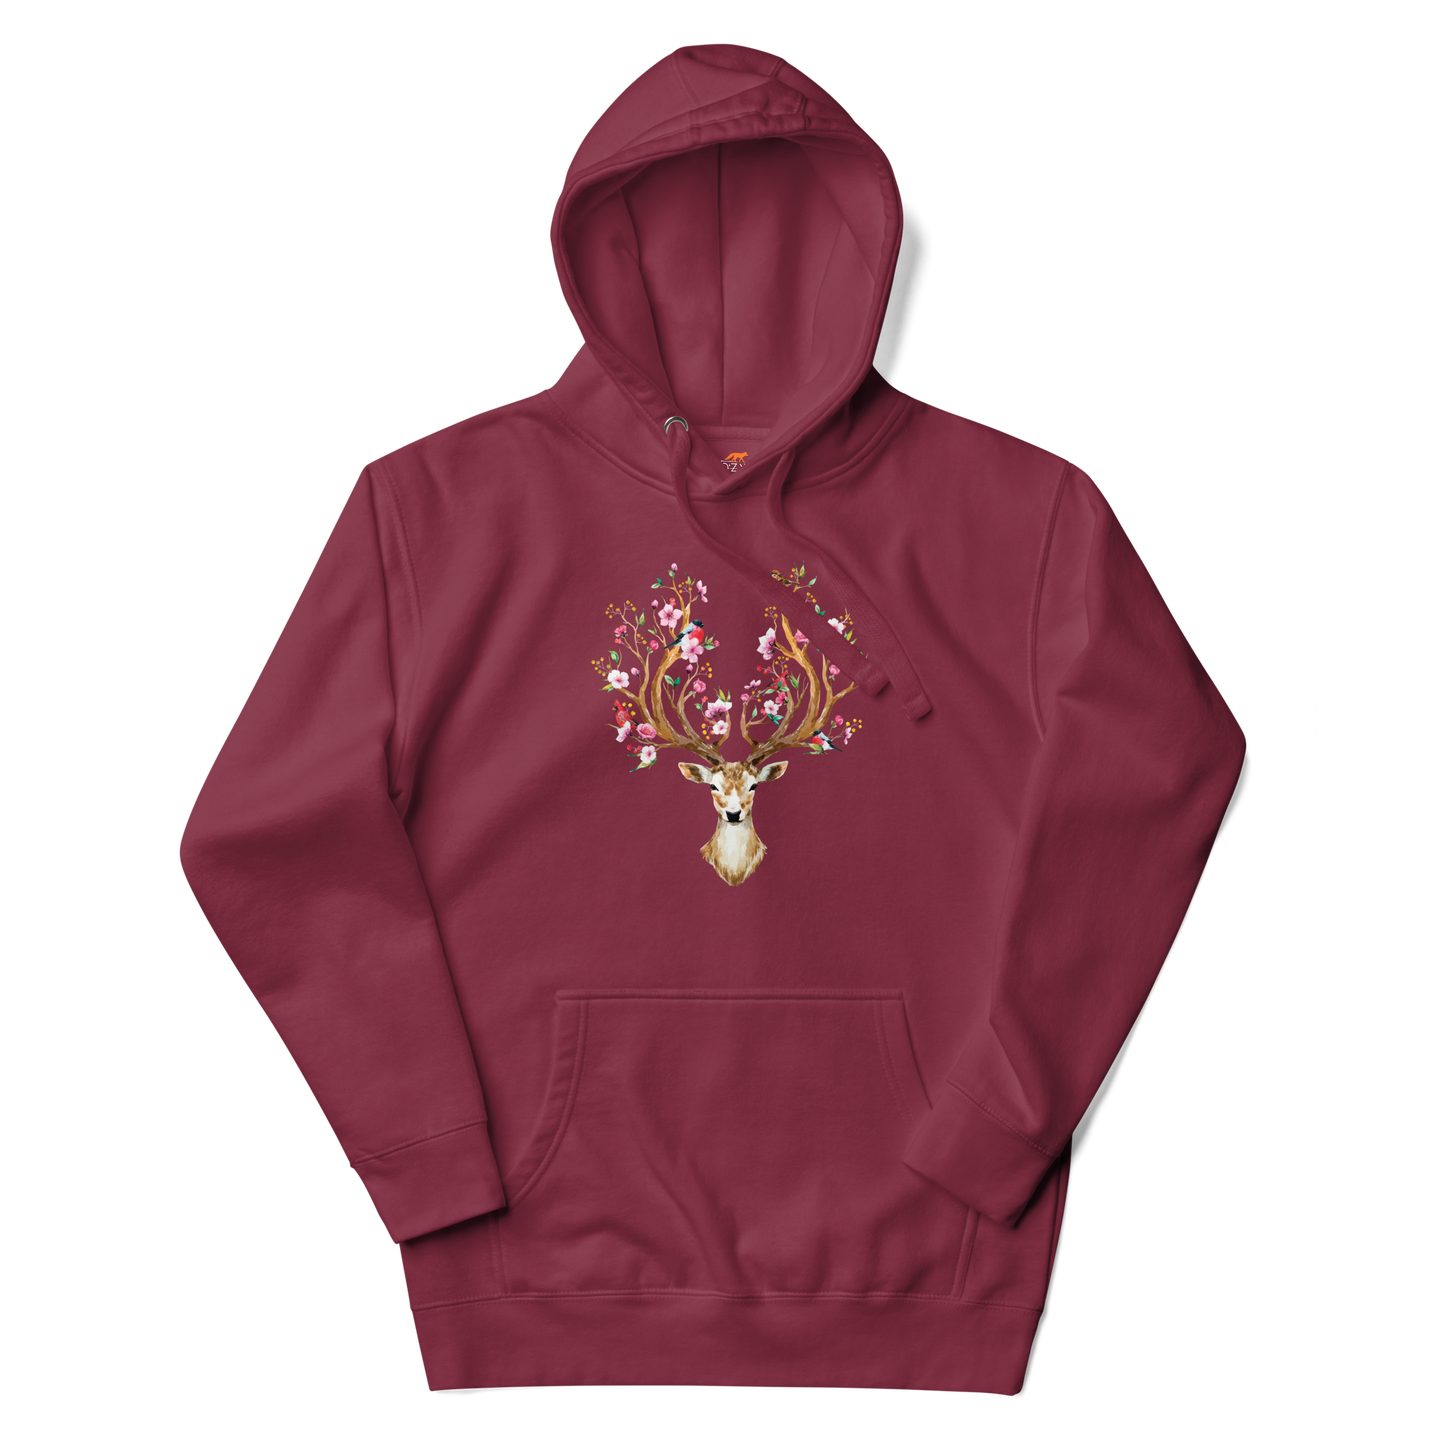 Maroon Premium Floral Red Deer Hoodie featuring a captivating Floral Red Deer graphic on the chest - Cute Graphic Deer Hoodies - Boozy Fox